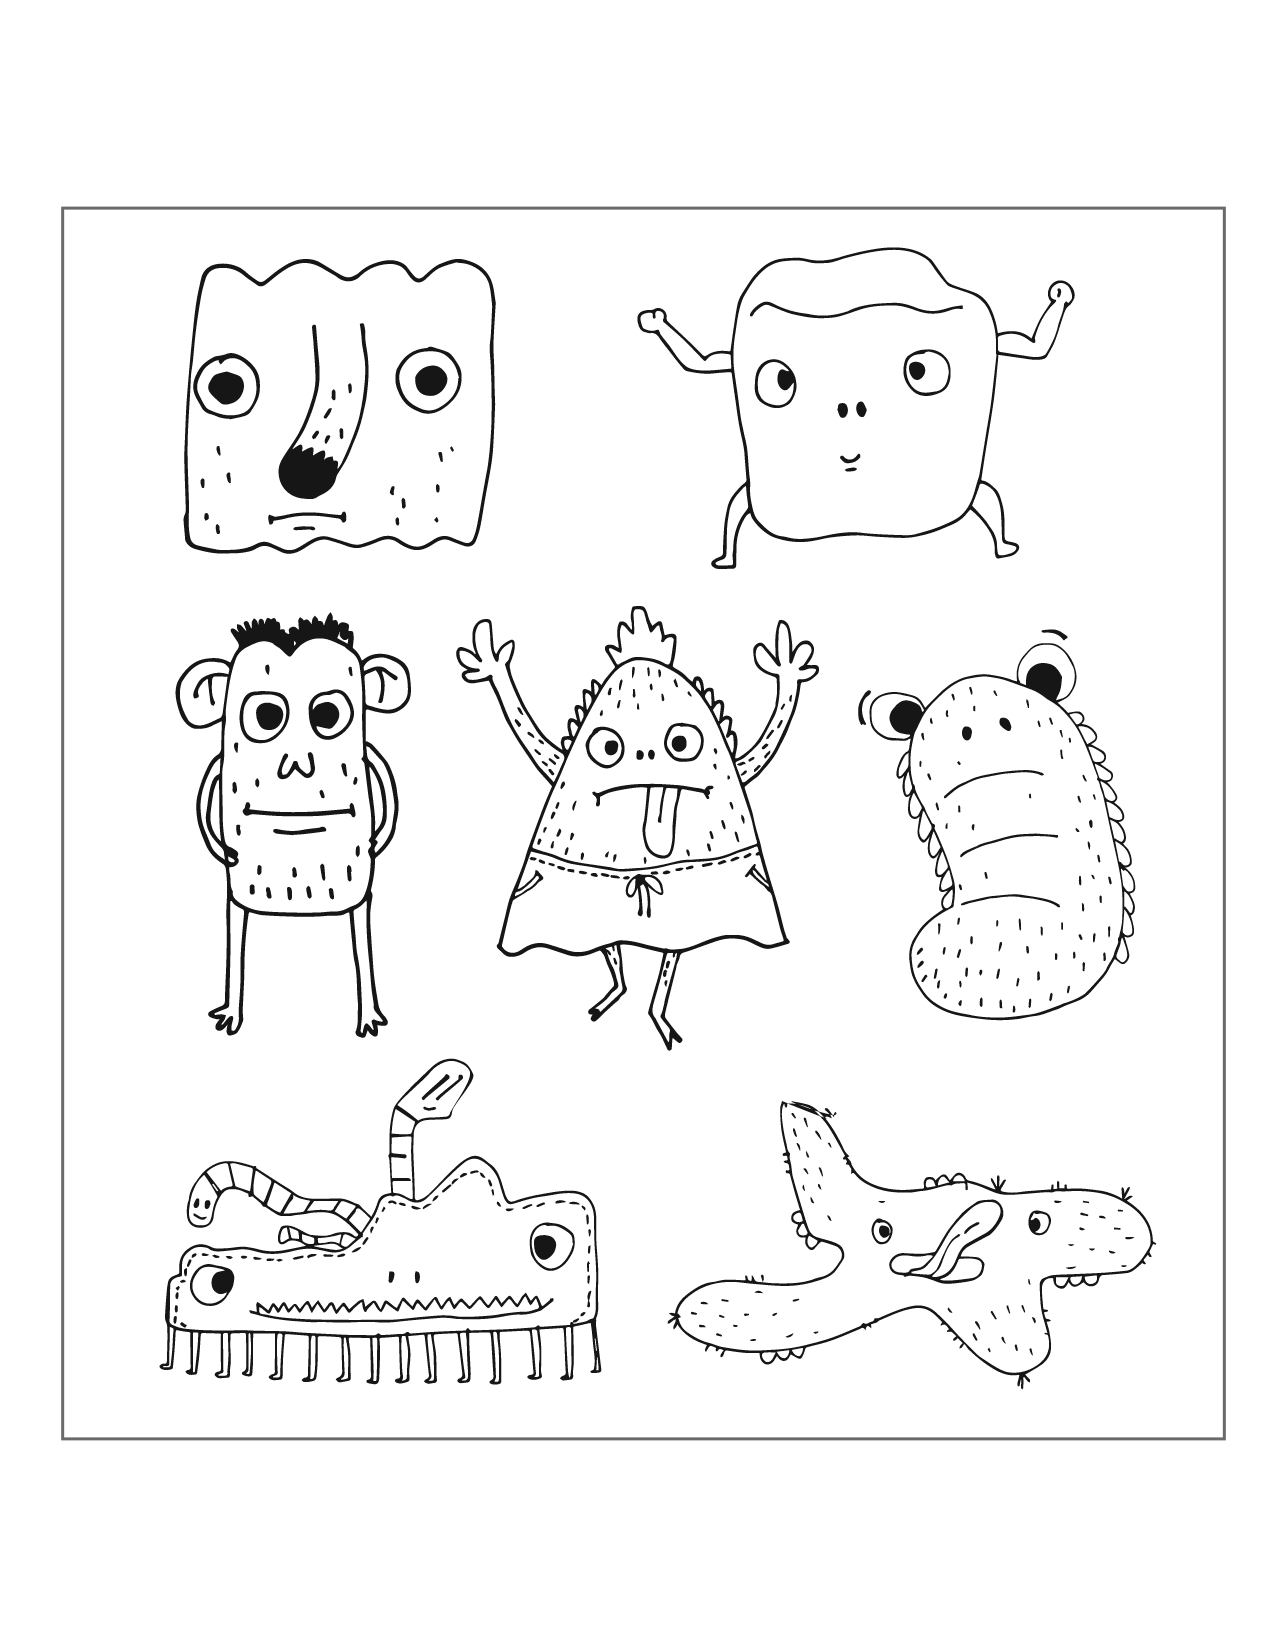 Cute Monster Characters Coloring Page 04